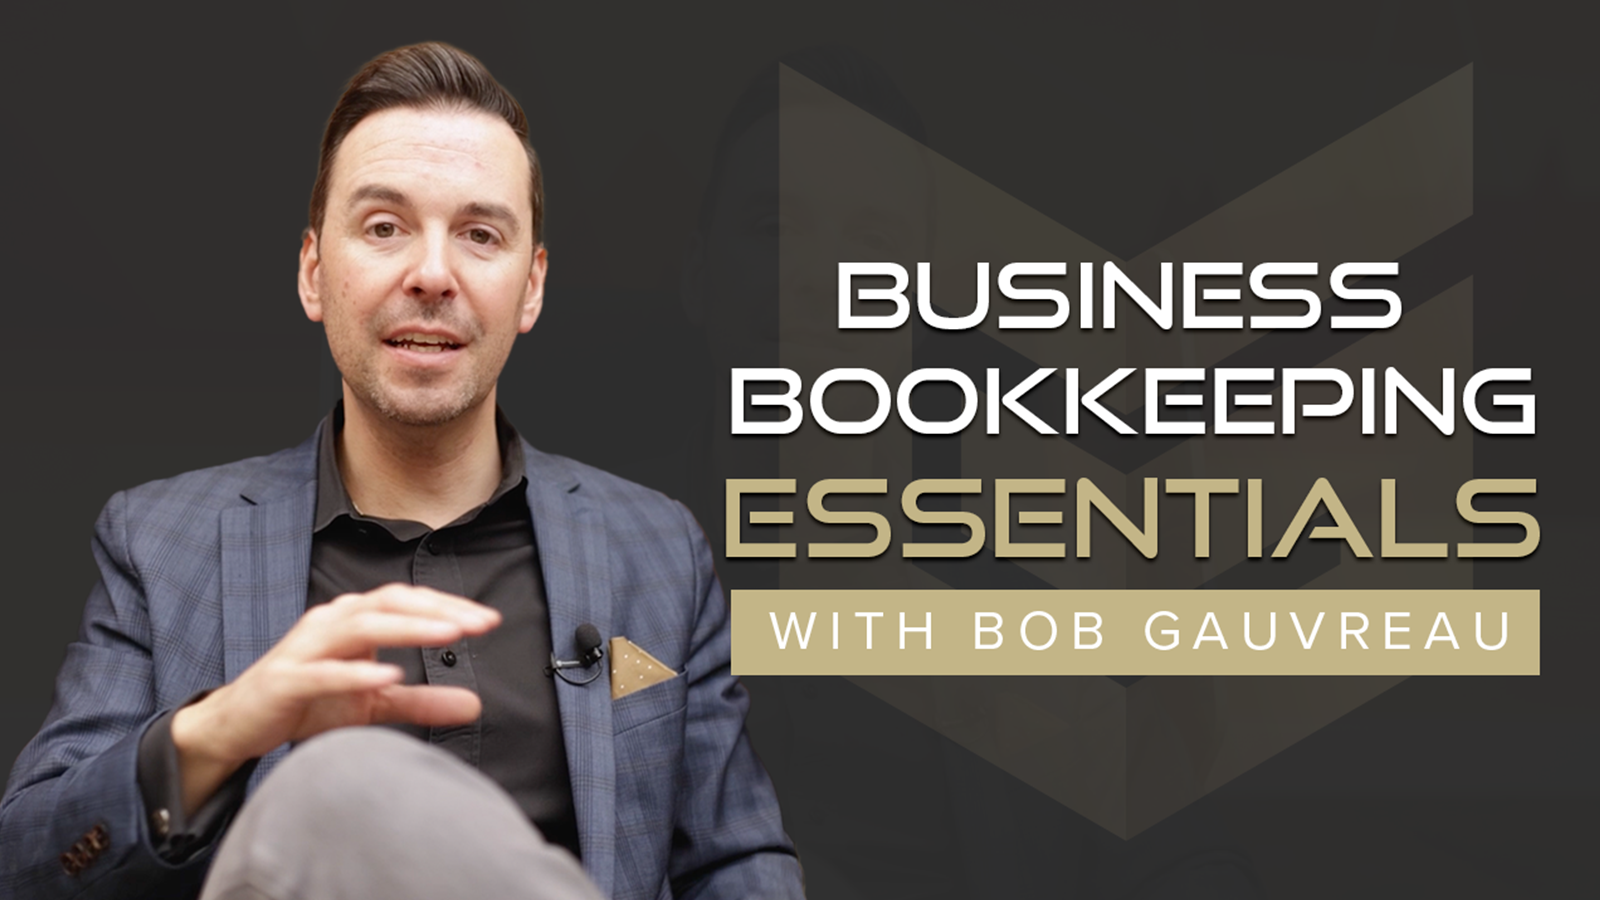 Image of Bob with the text Business Bookkeeping Essentials with Bob Gauvreau